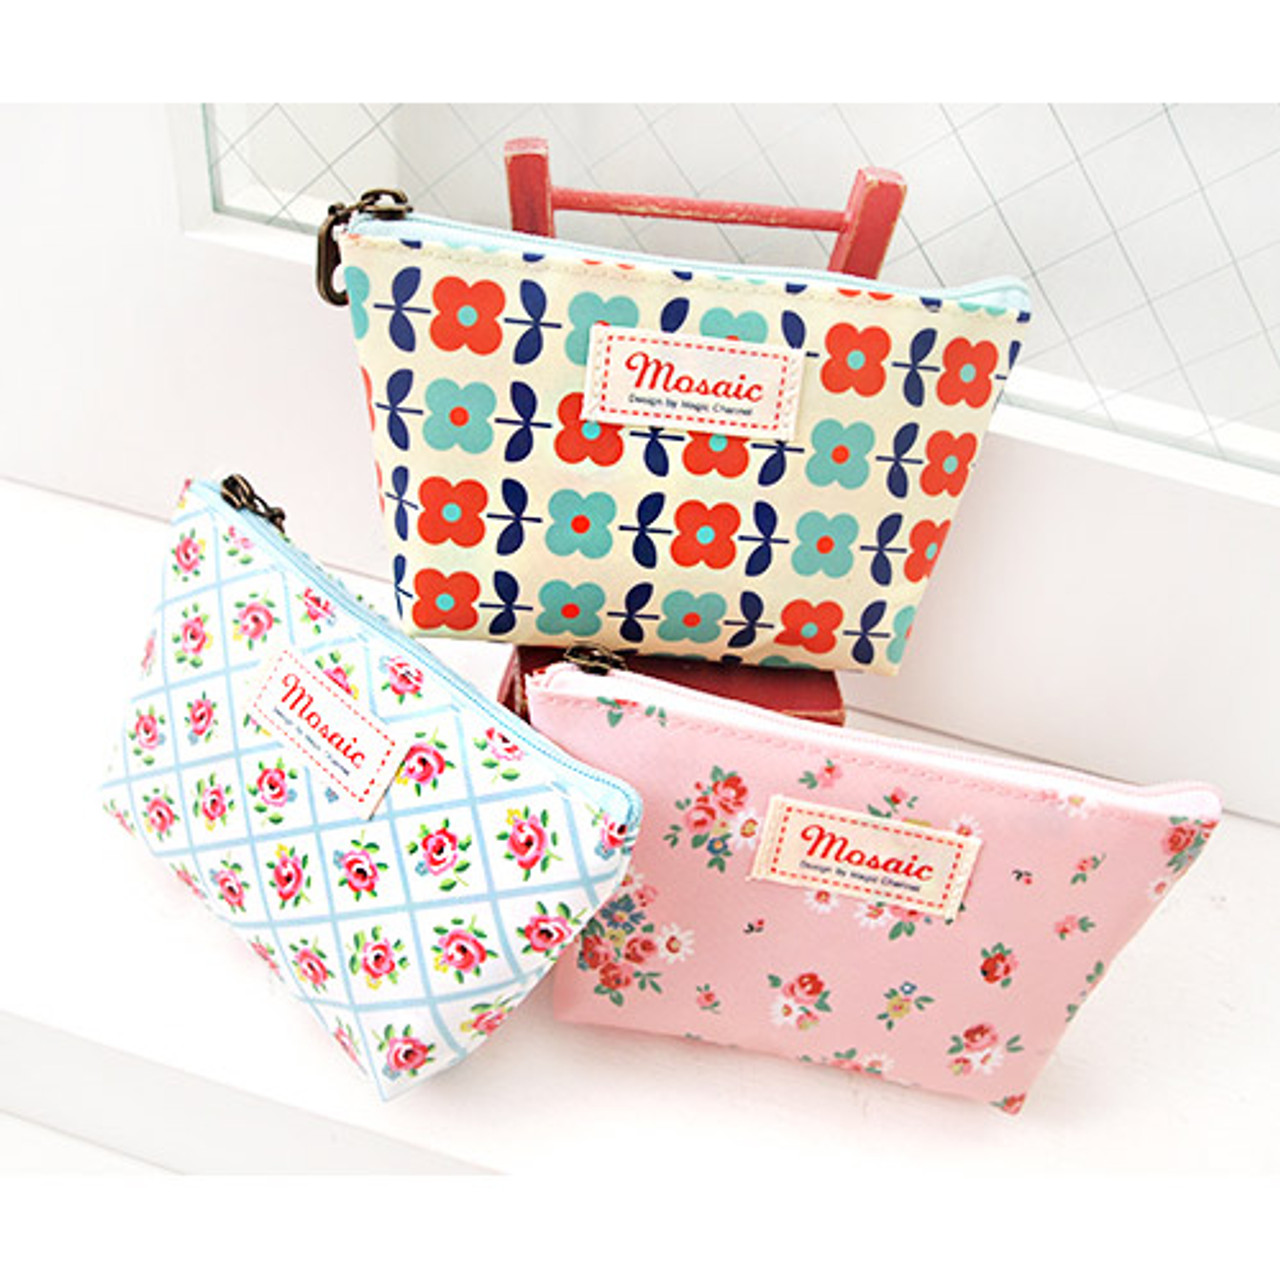 2Young Flower pattern zipper pouch - Small, fallindesign.com